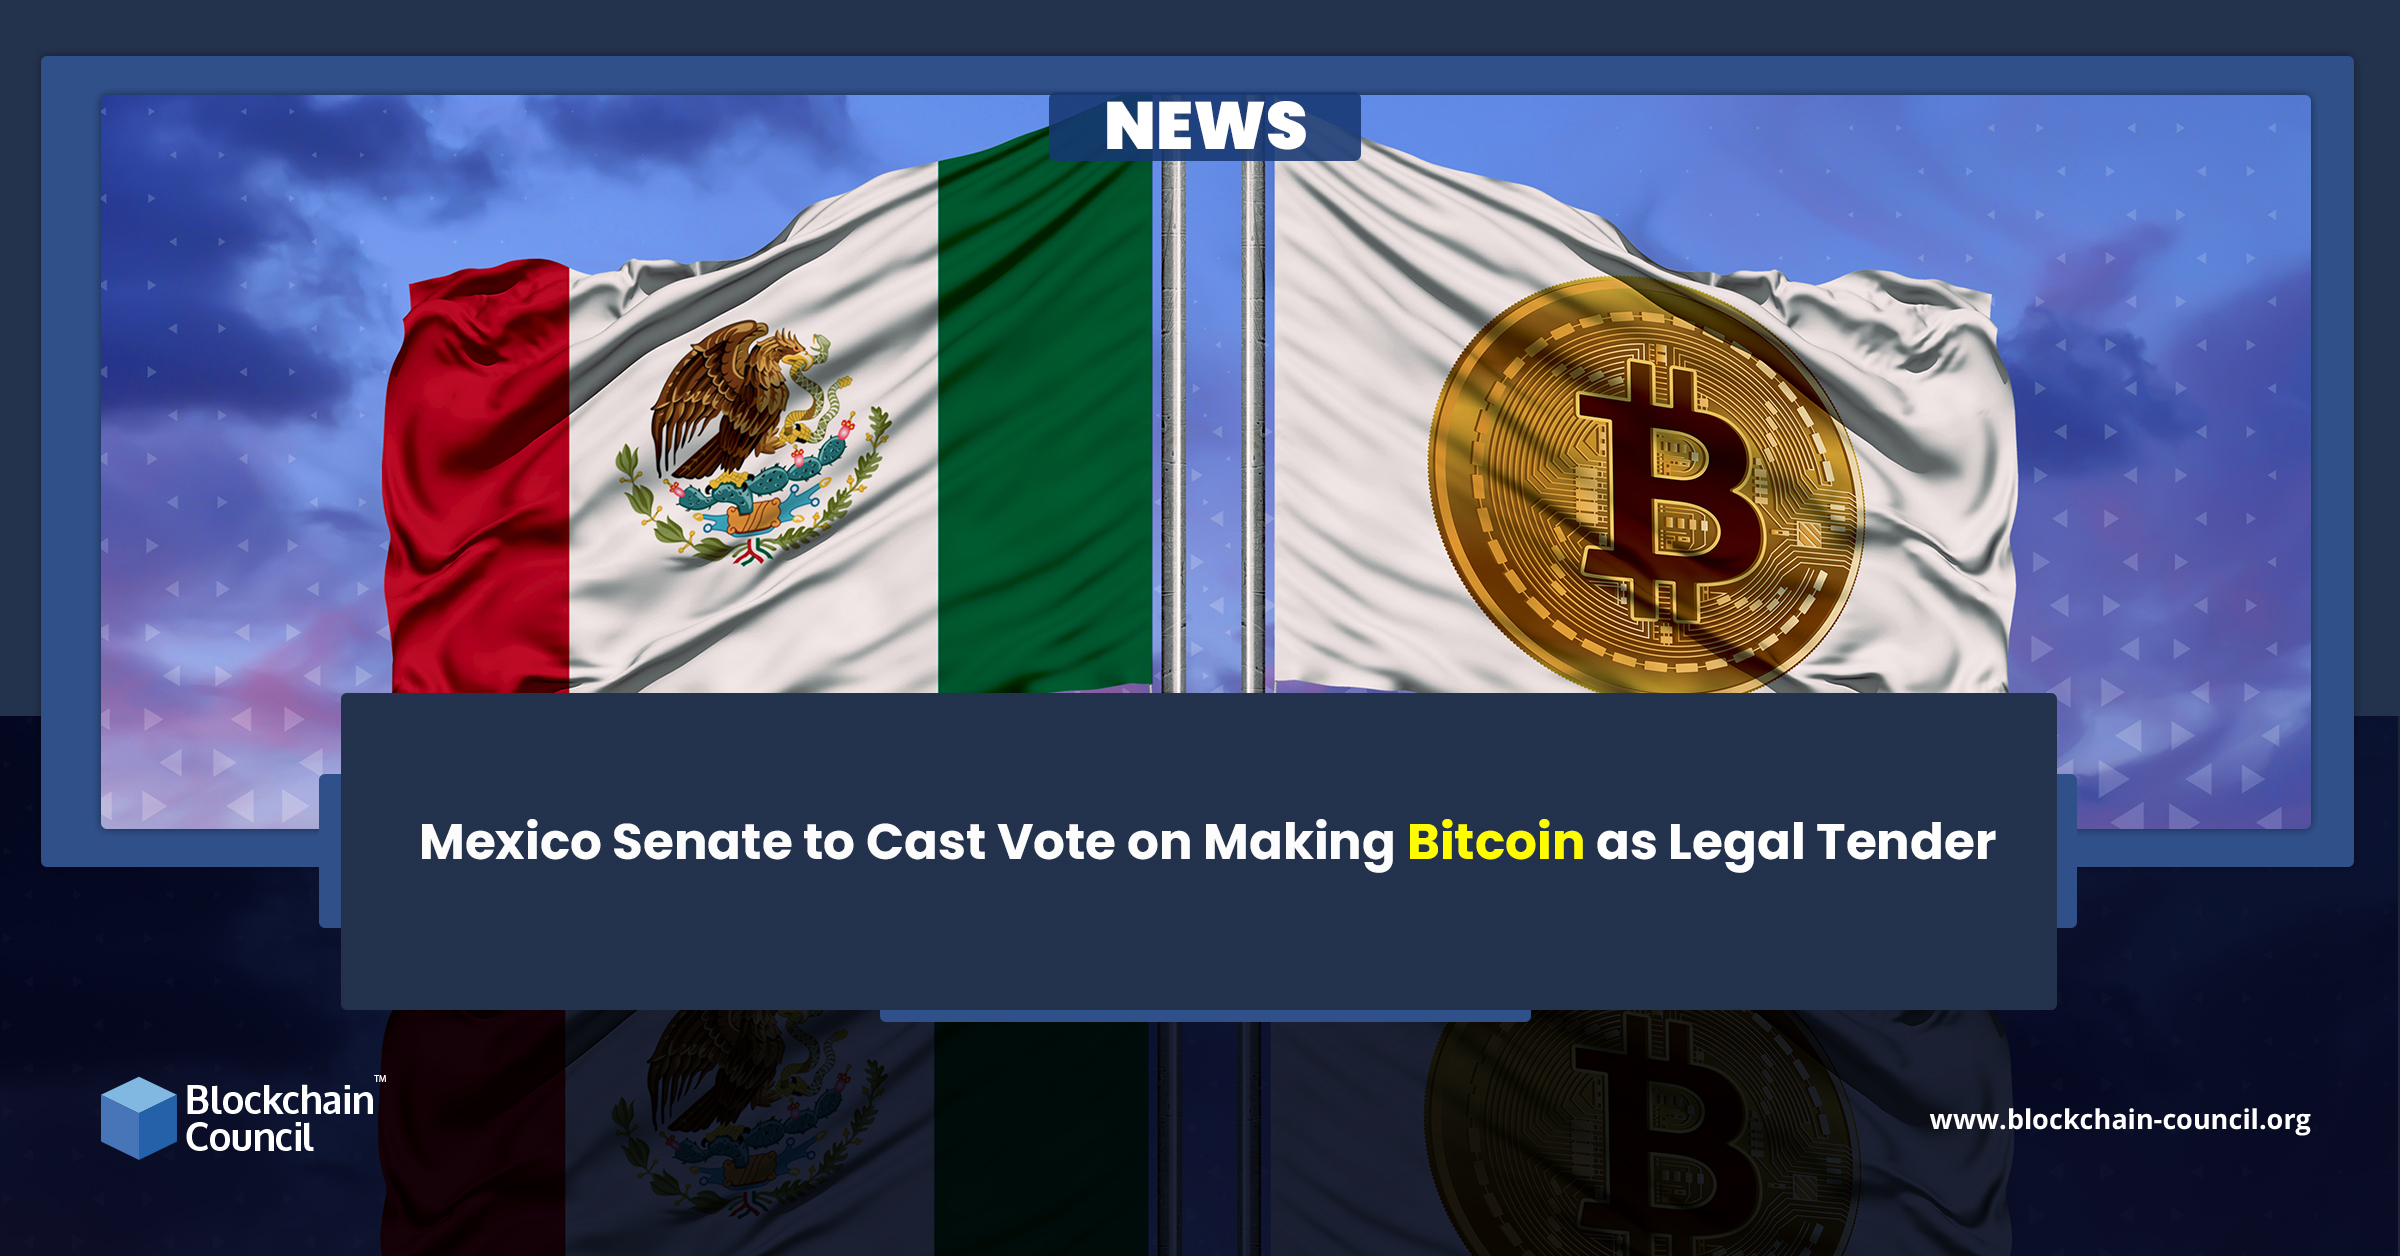 Mexico Senate to Cast Vote on Making Bitcoin as Legal Tender